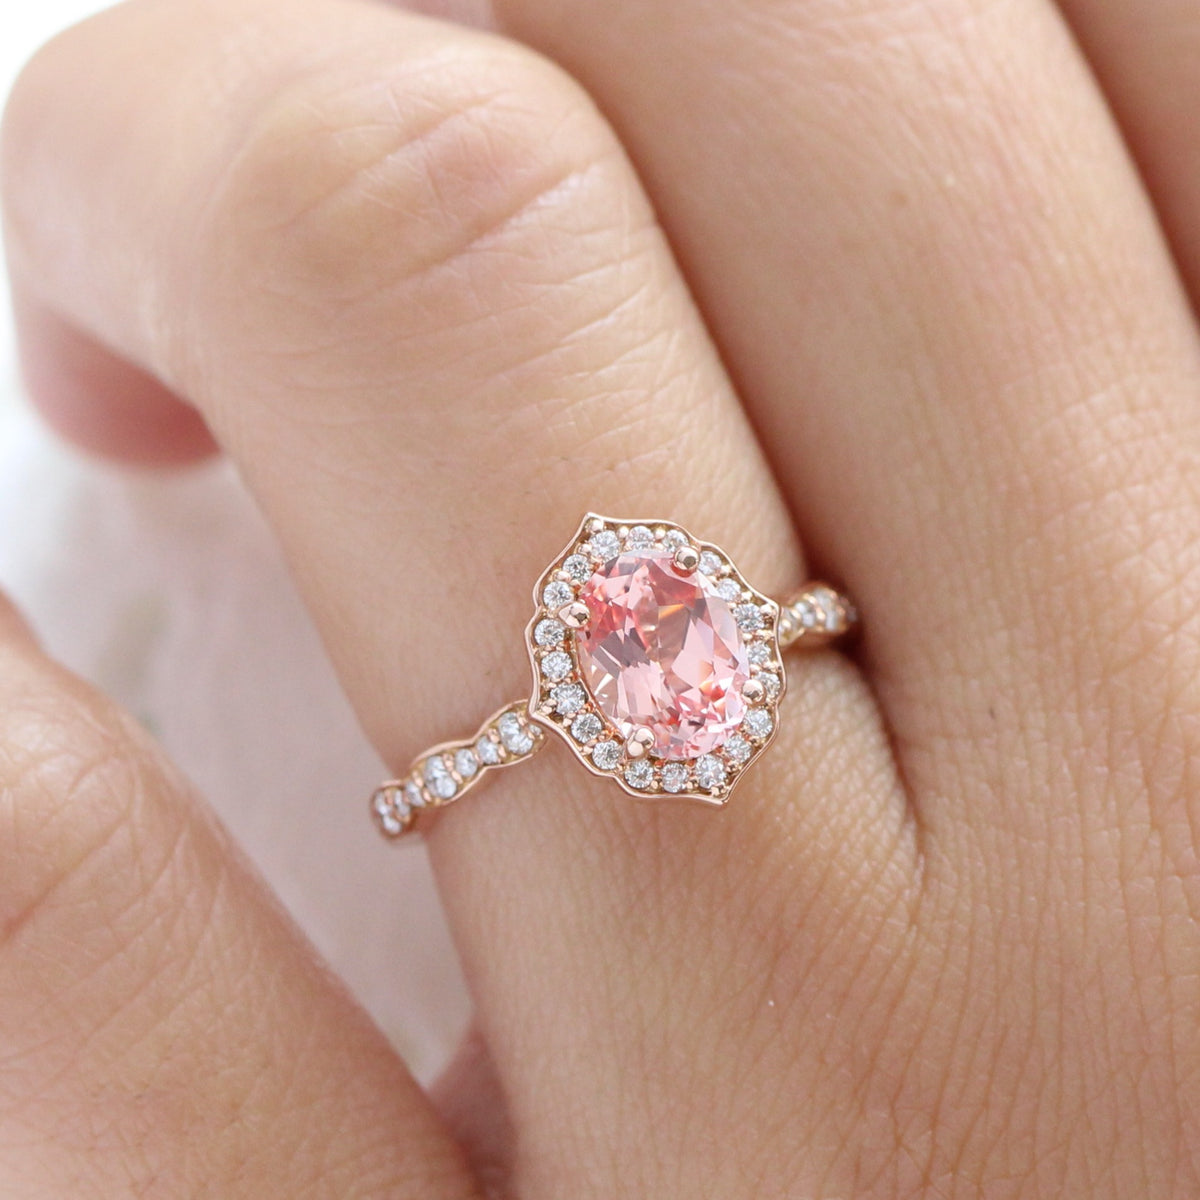 Oval peach sapphire engagement ring rose gold vintage halo diamond sapphire ring la more design jewelry